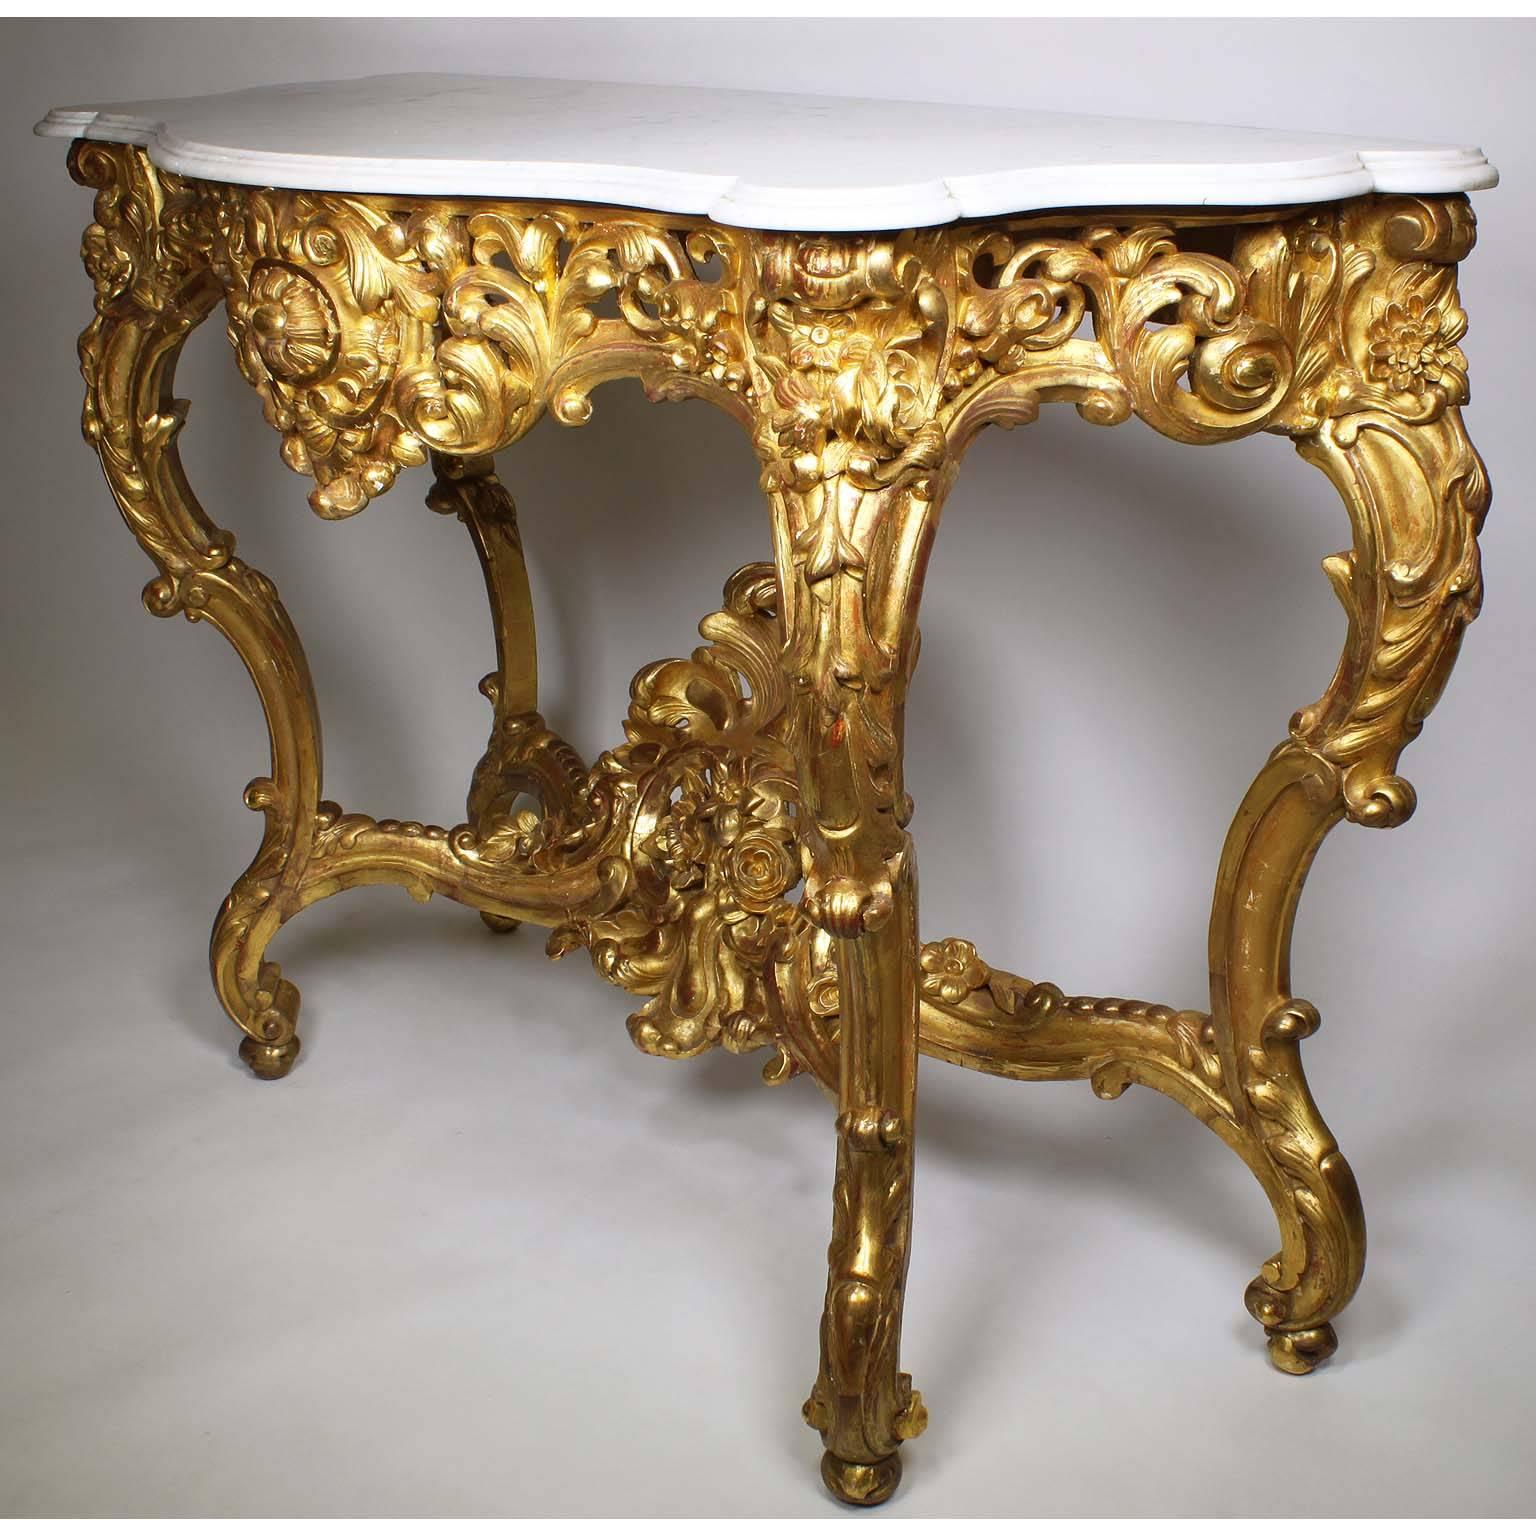 A fine French Belle Époque 19th-20th century, Louis XV style giltwood carved wall console table with marble top. The front intricately carved apron with scrolls and acanthus within floral design. The four cabriolet 